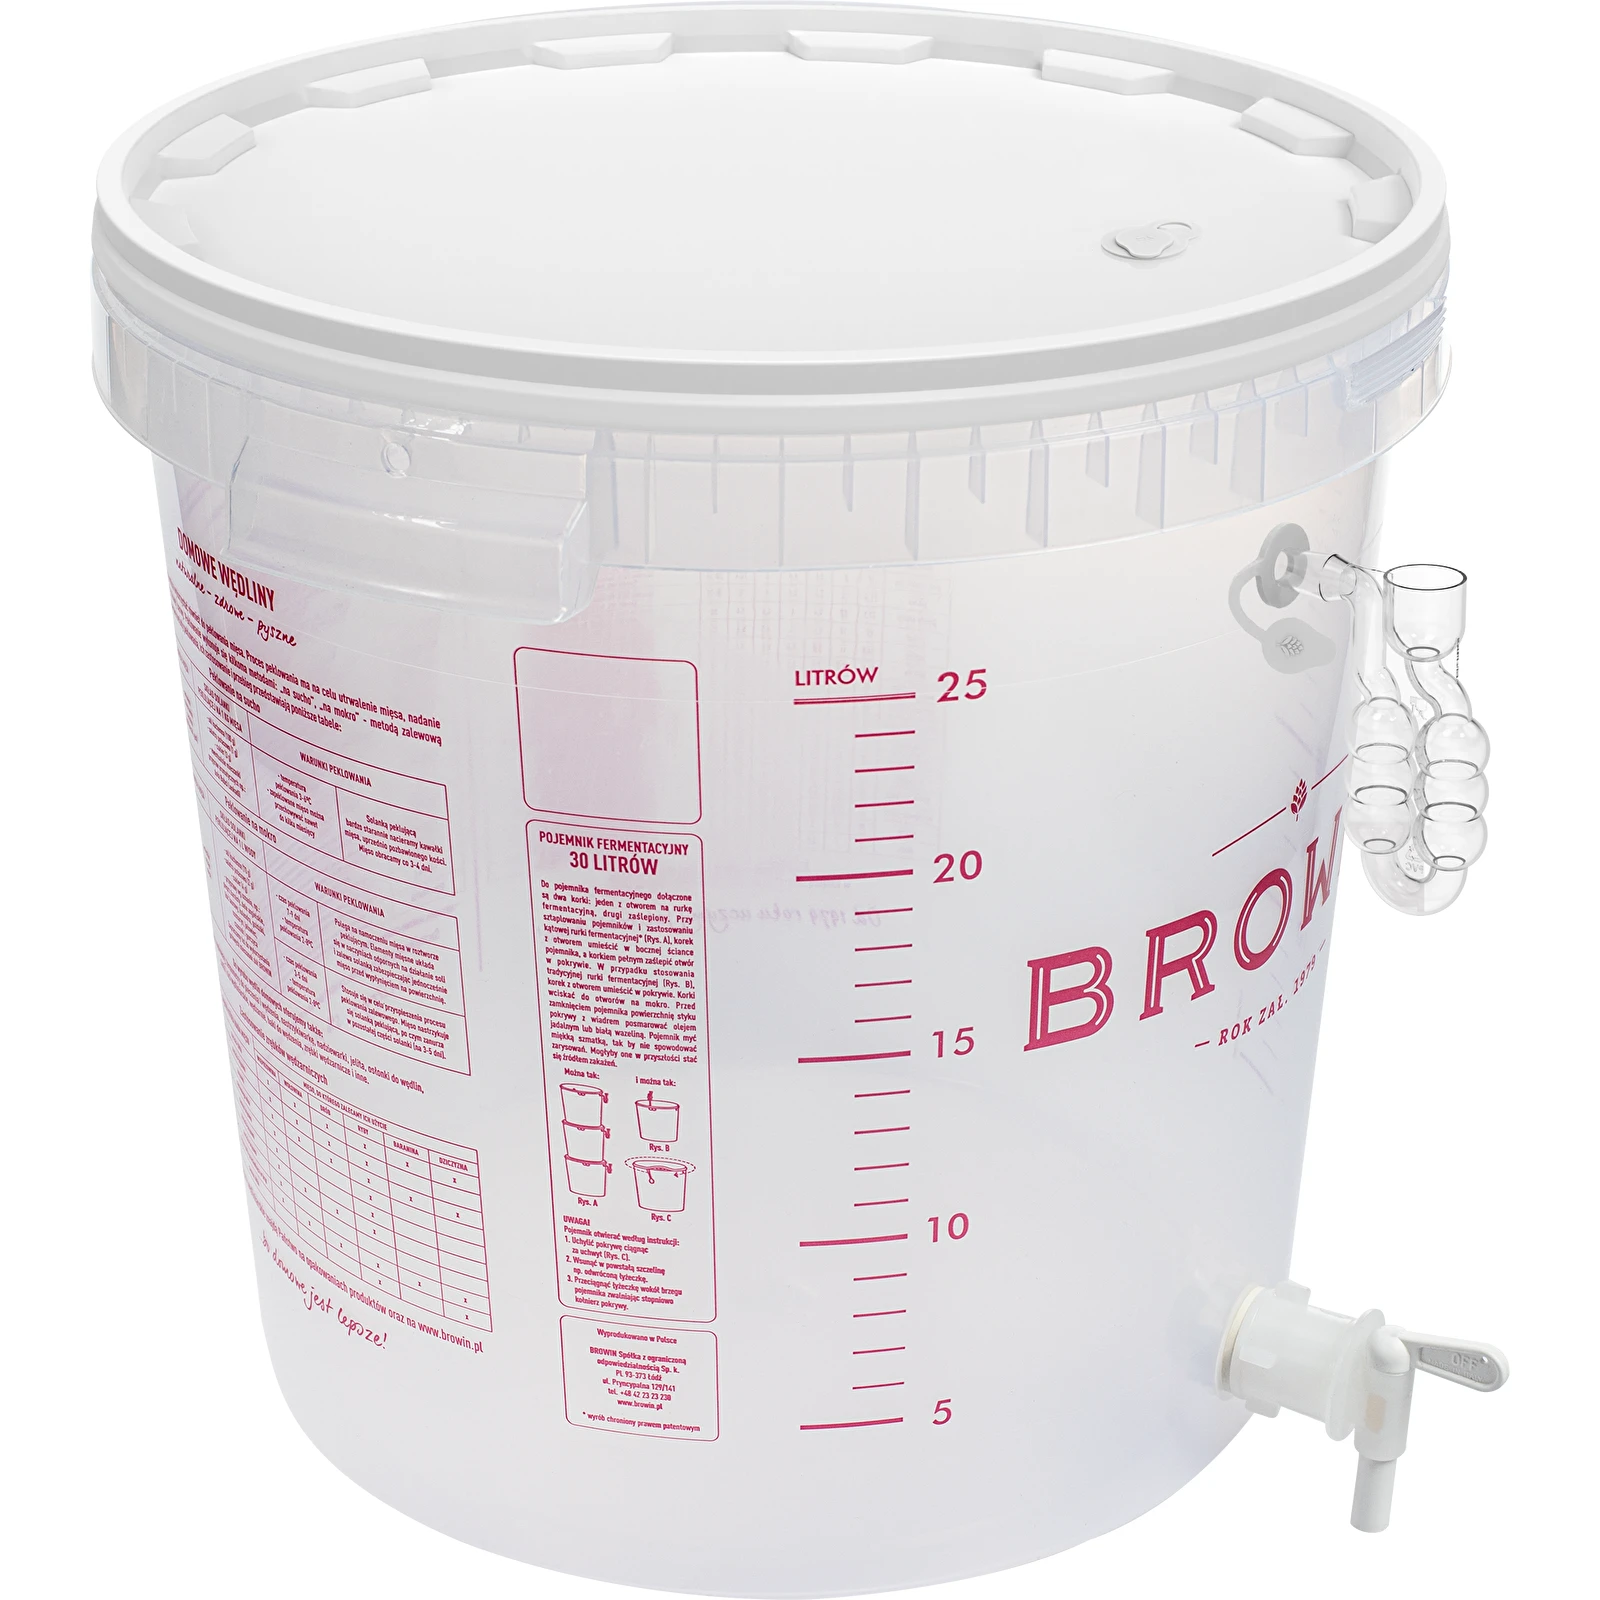 https://browin.com/static/images/1600/30-l-fermentation-container-with-a-lid-tap-and-shatterproof-angled-airlock-340455.webp